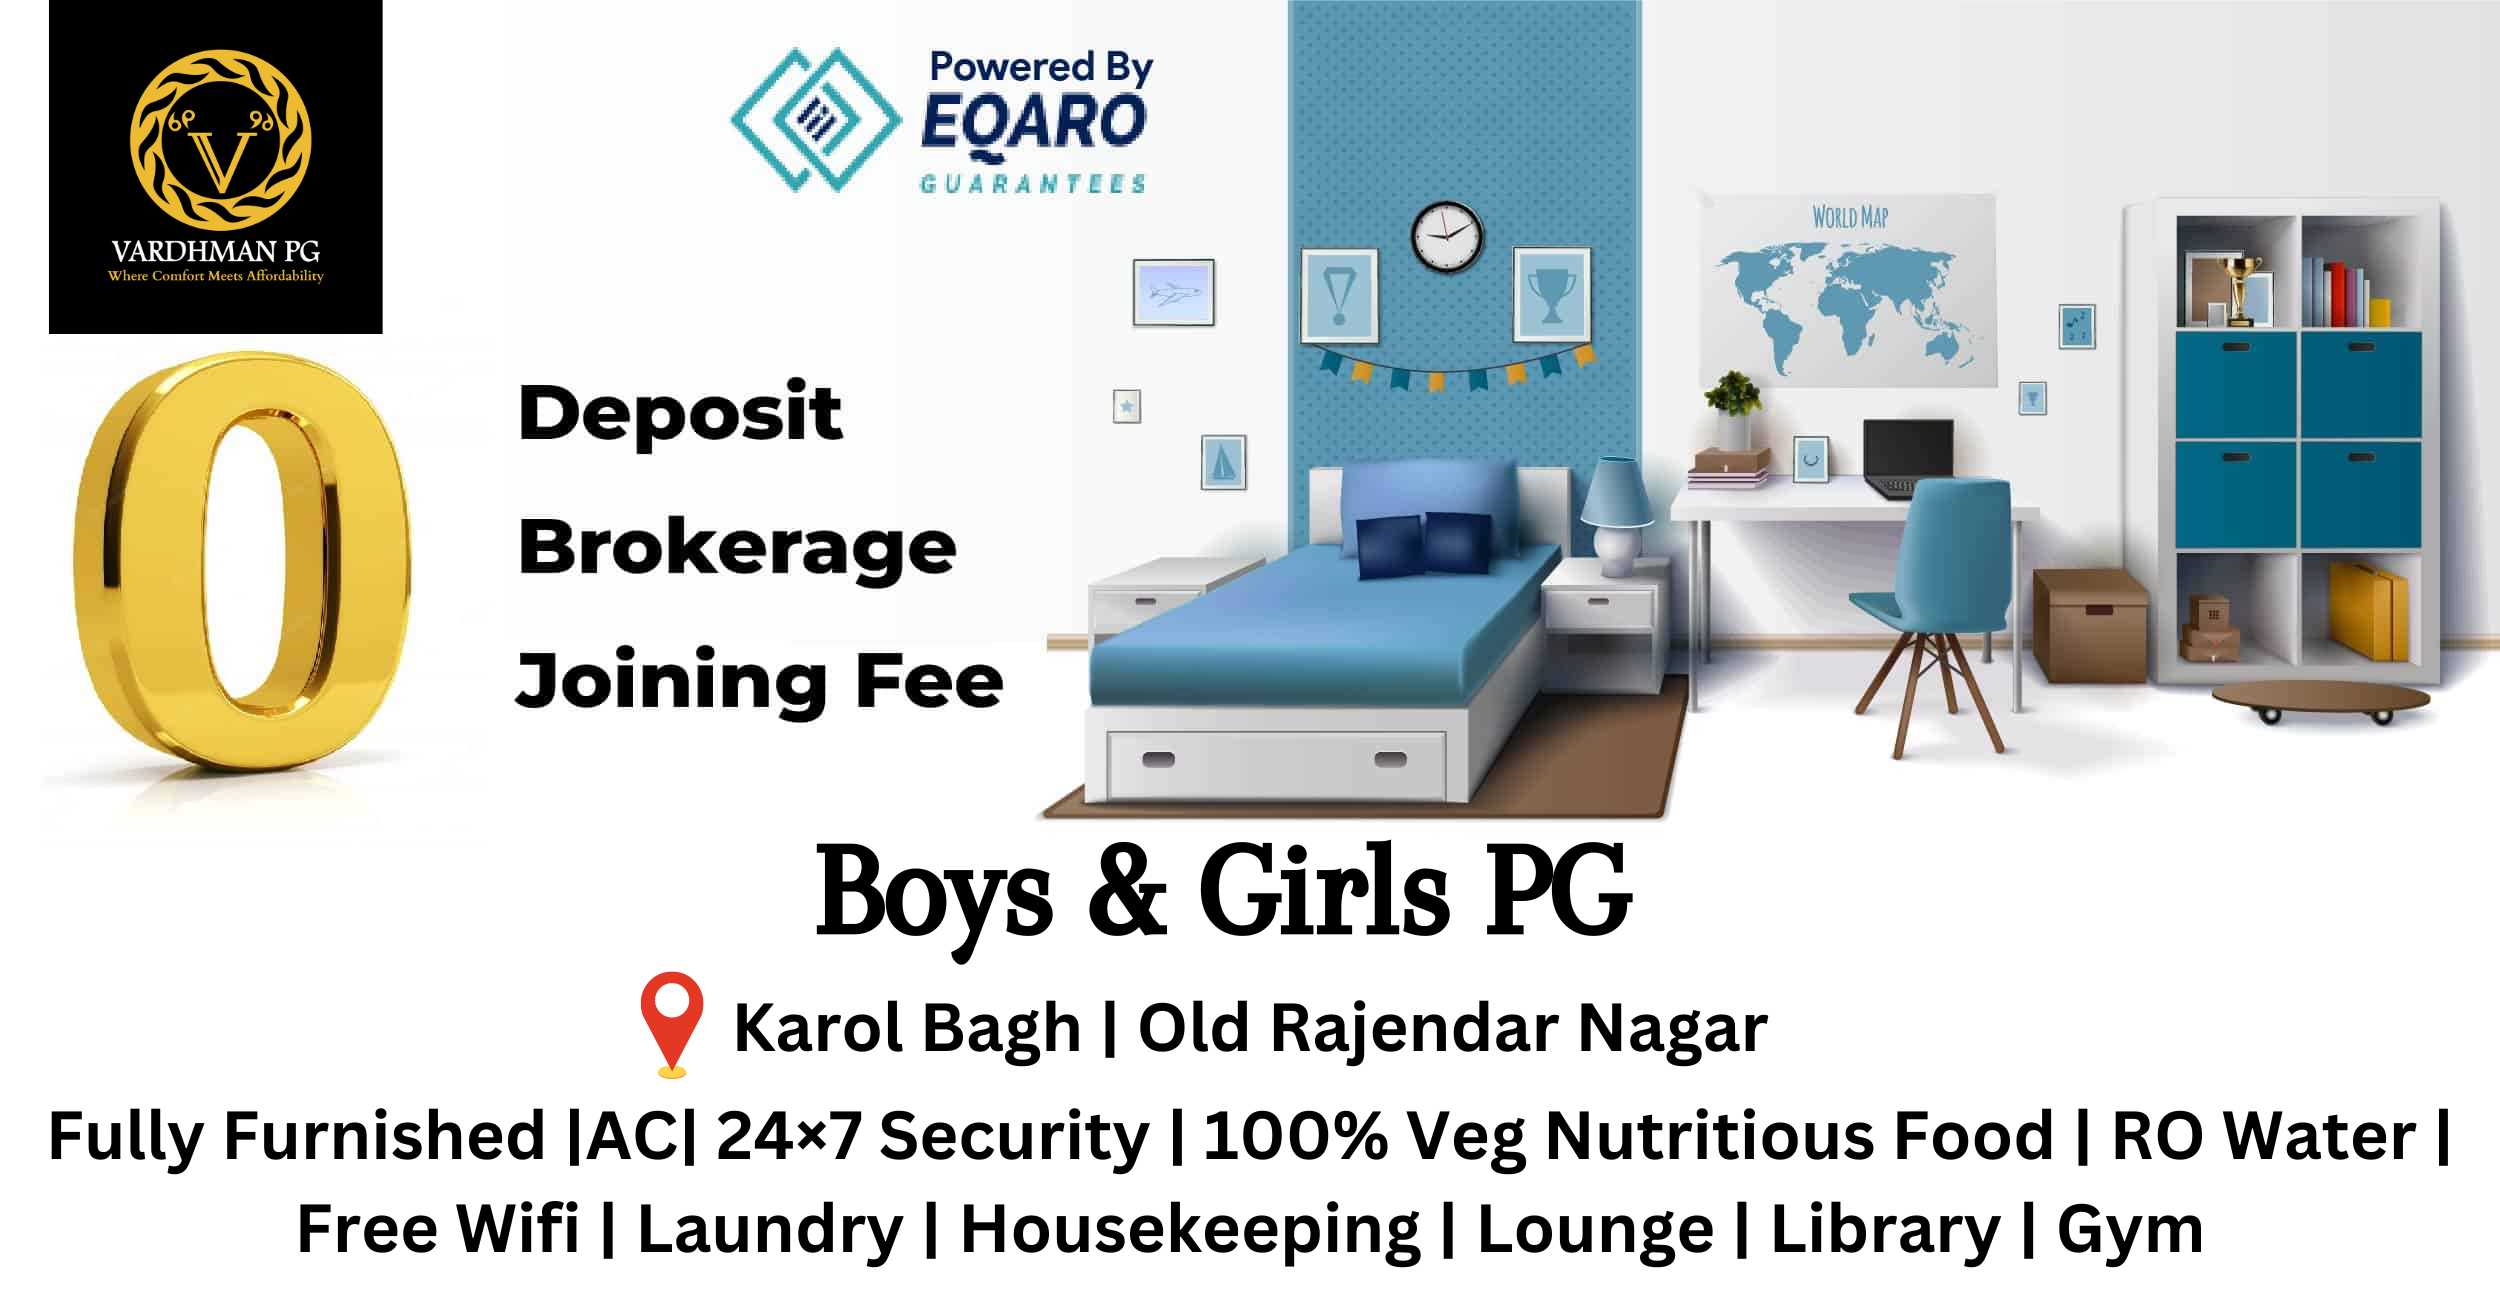 Image of a dorm room advertisement with a bed, desk, and clock. Text lists amenities including Wi-Fi, laundry, and a gym. VARDHMAN PG is written across the top. There is text at the bottom that says Karol Bagh | Old Rajendar Nagar.